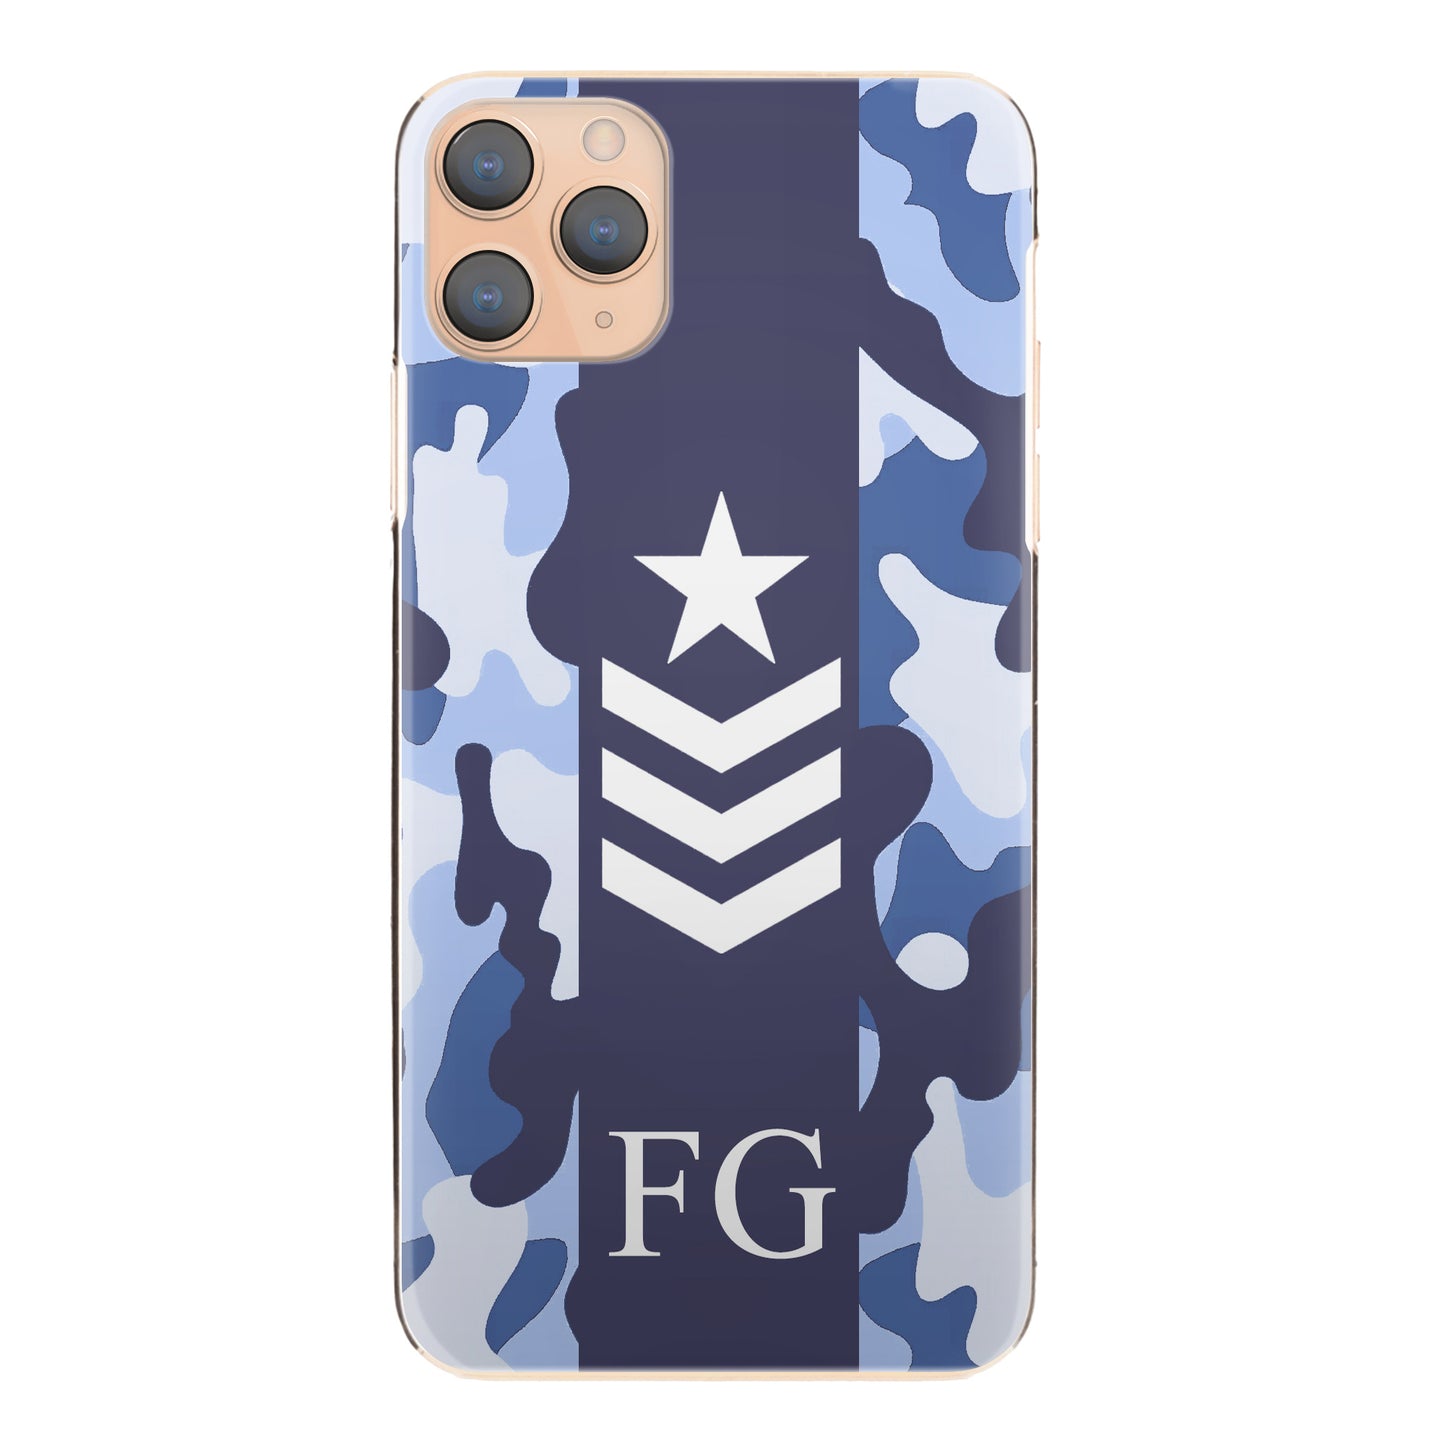 Personalised Oppo Phone Hard Case with Initials and Army Rank on Blue Camo